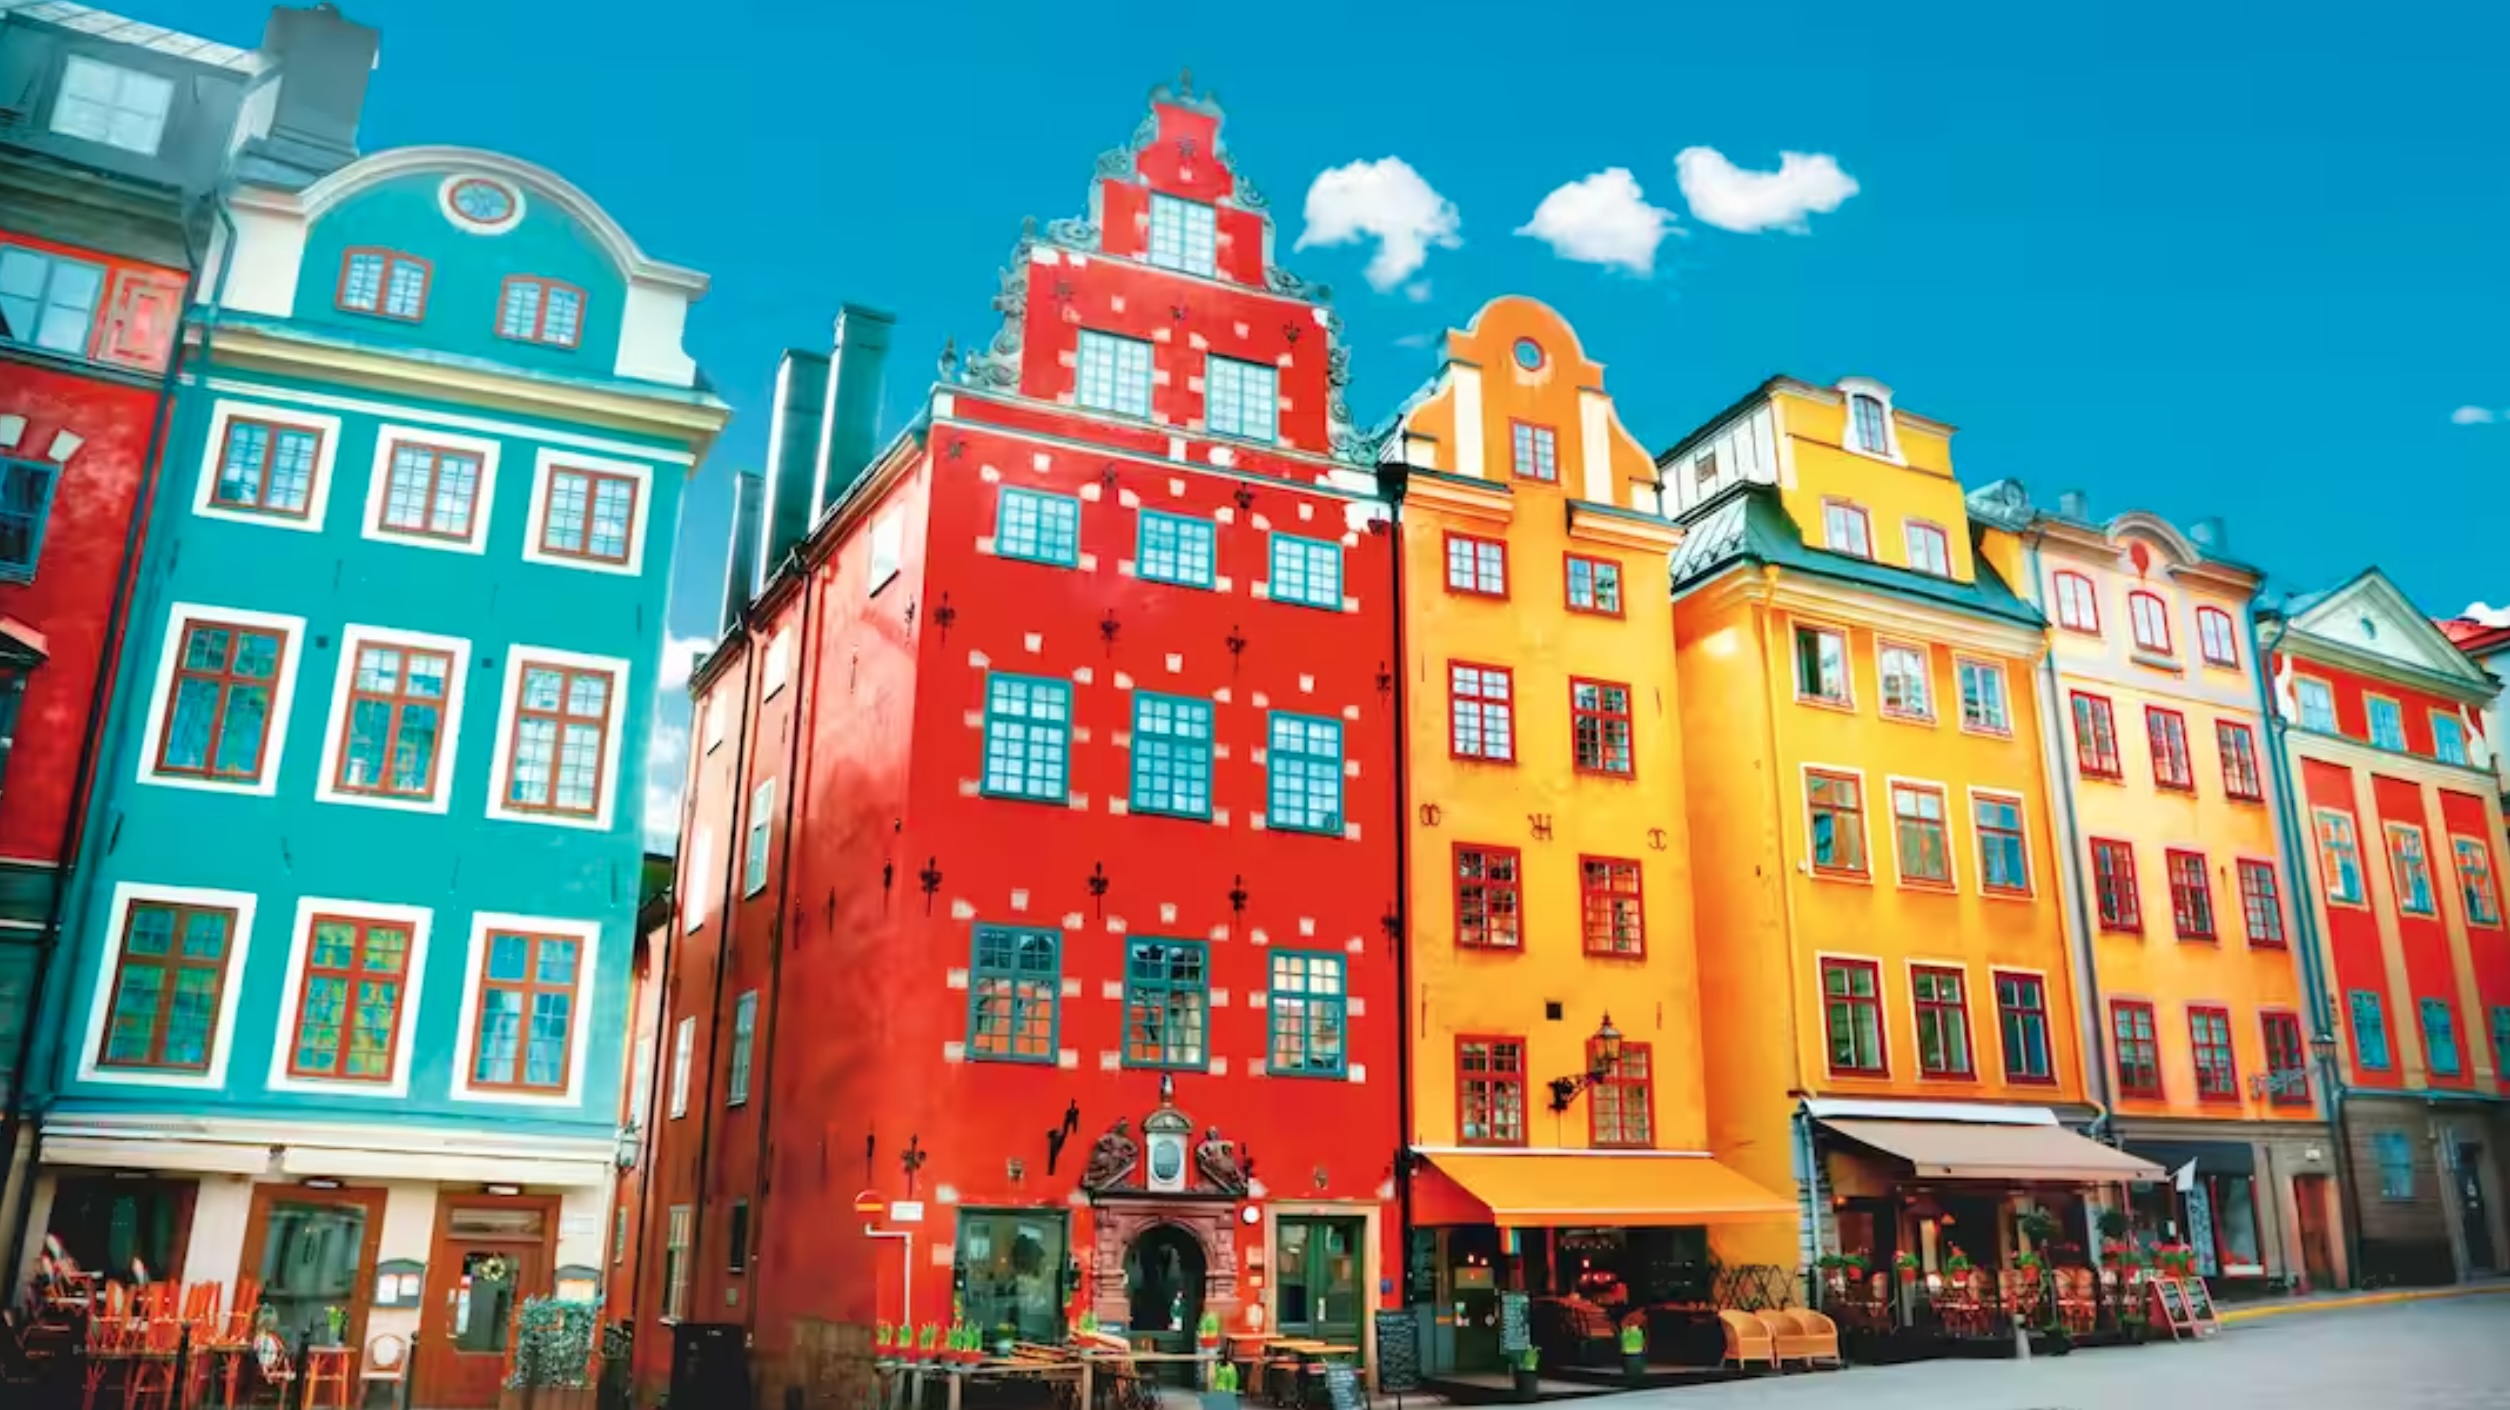 Colourful buildings in Stockholm